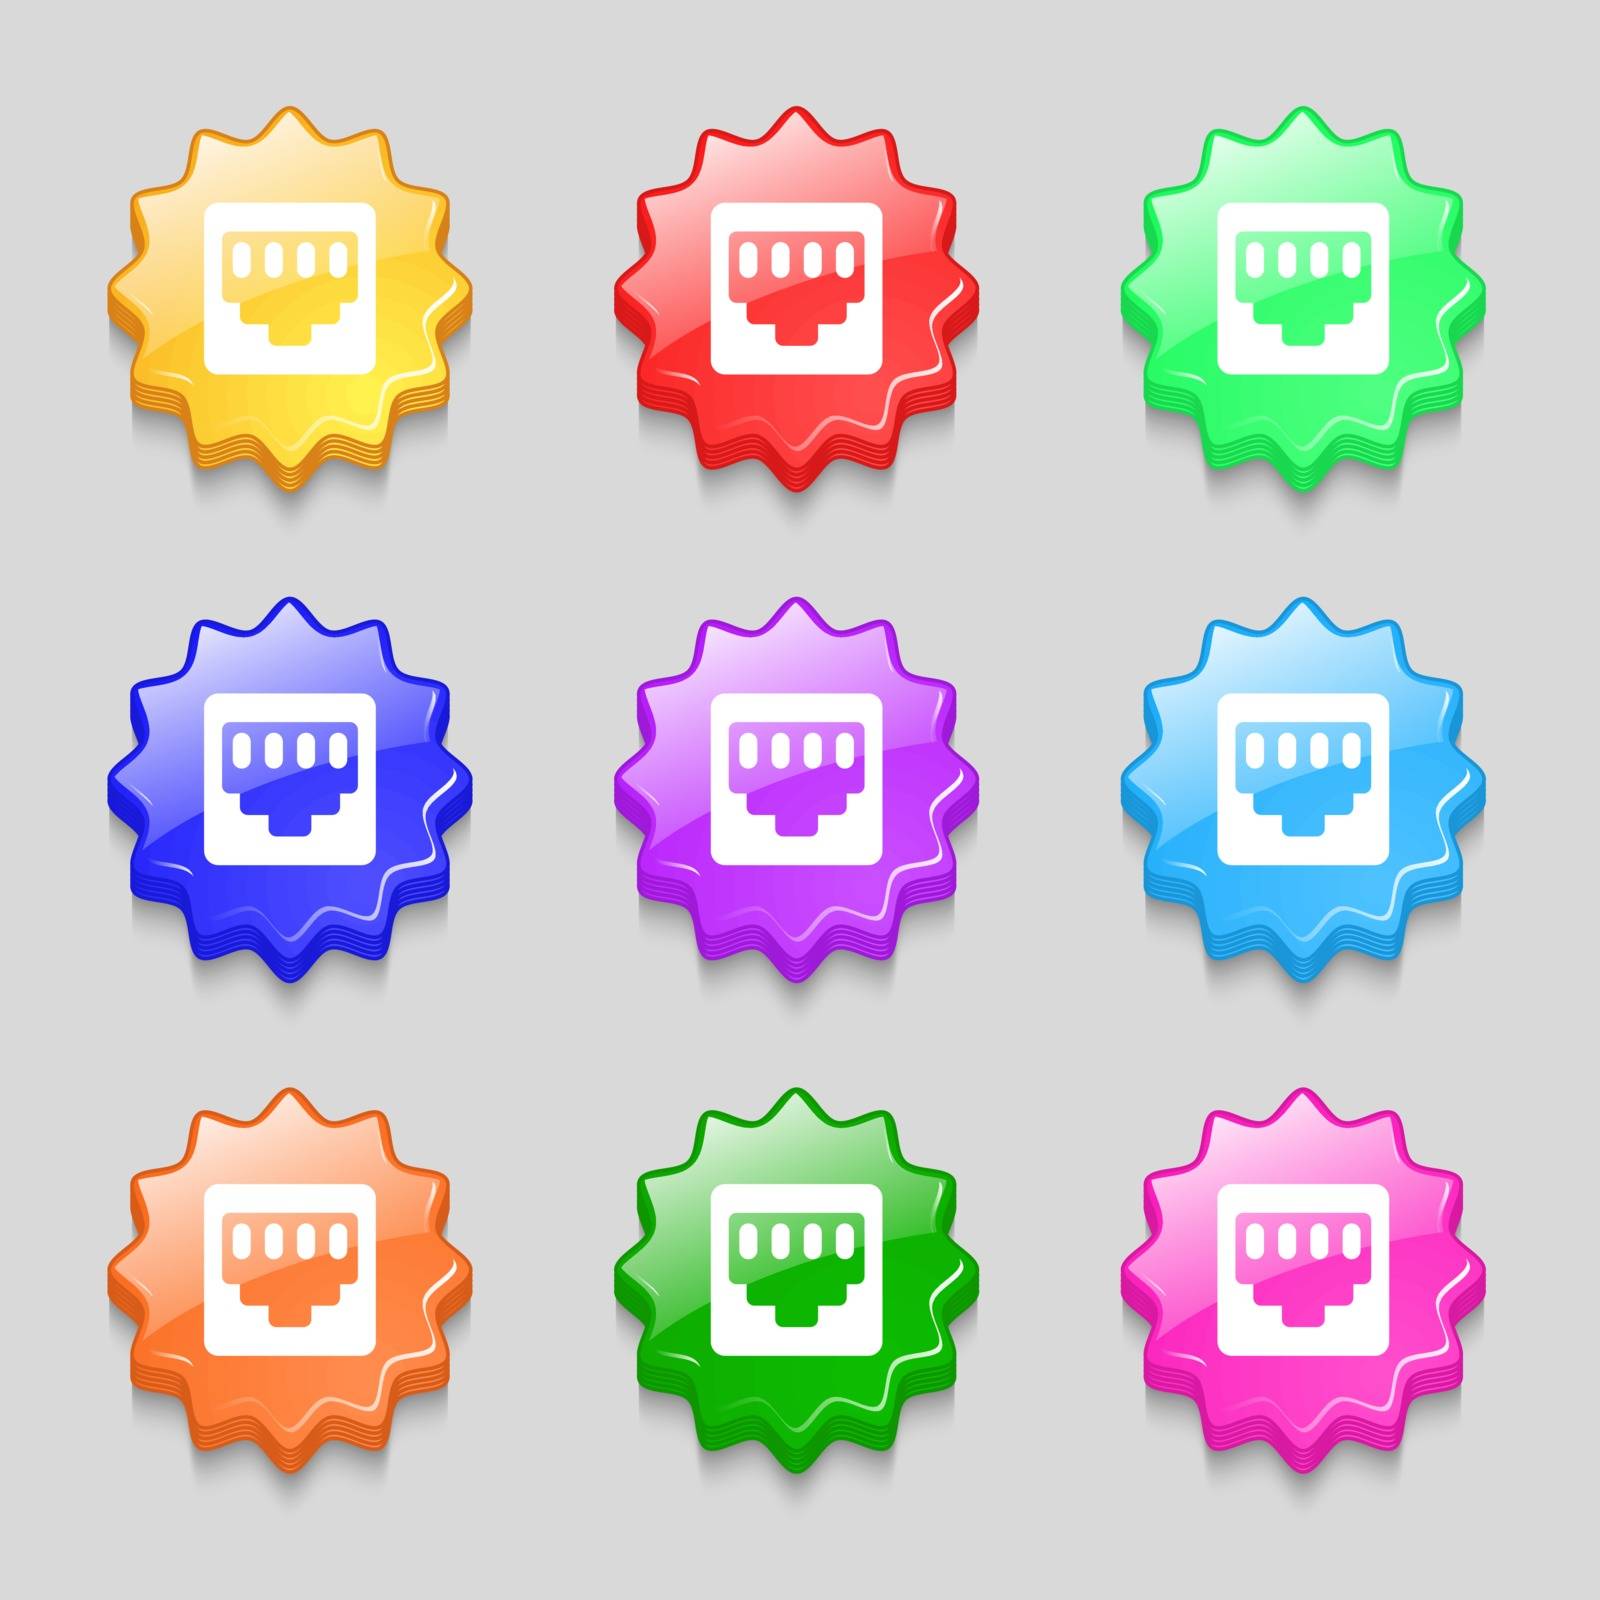 cable rj45, Patch Cord icon sign. symbol on nine wavy colourful buttons. Vector illustration